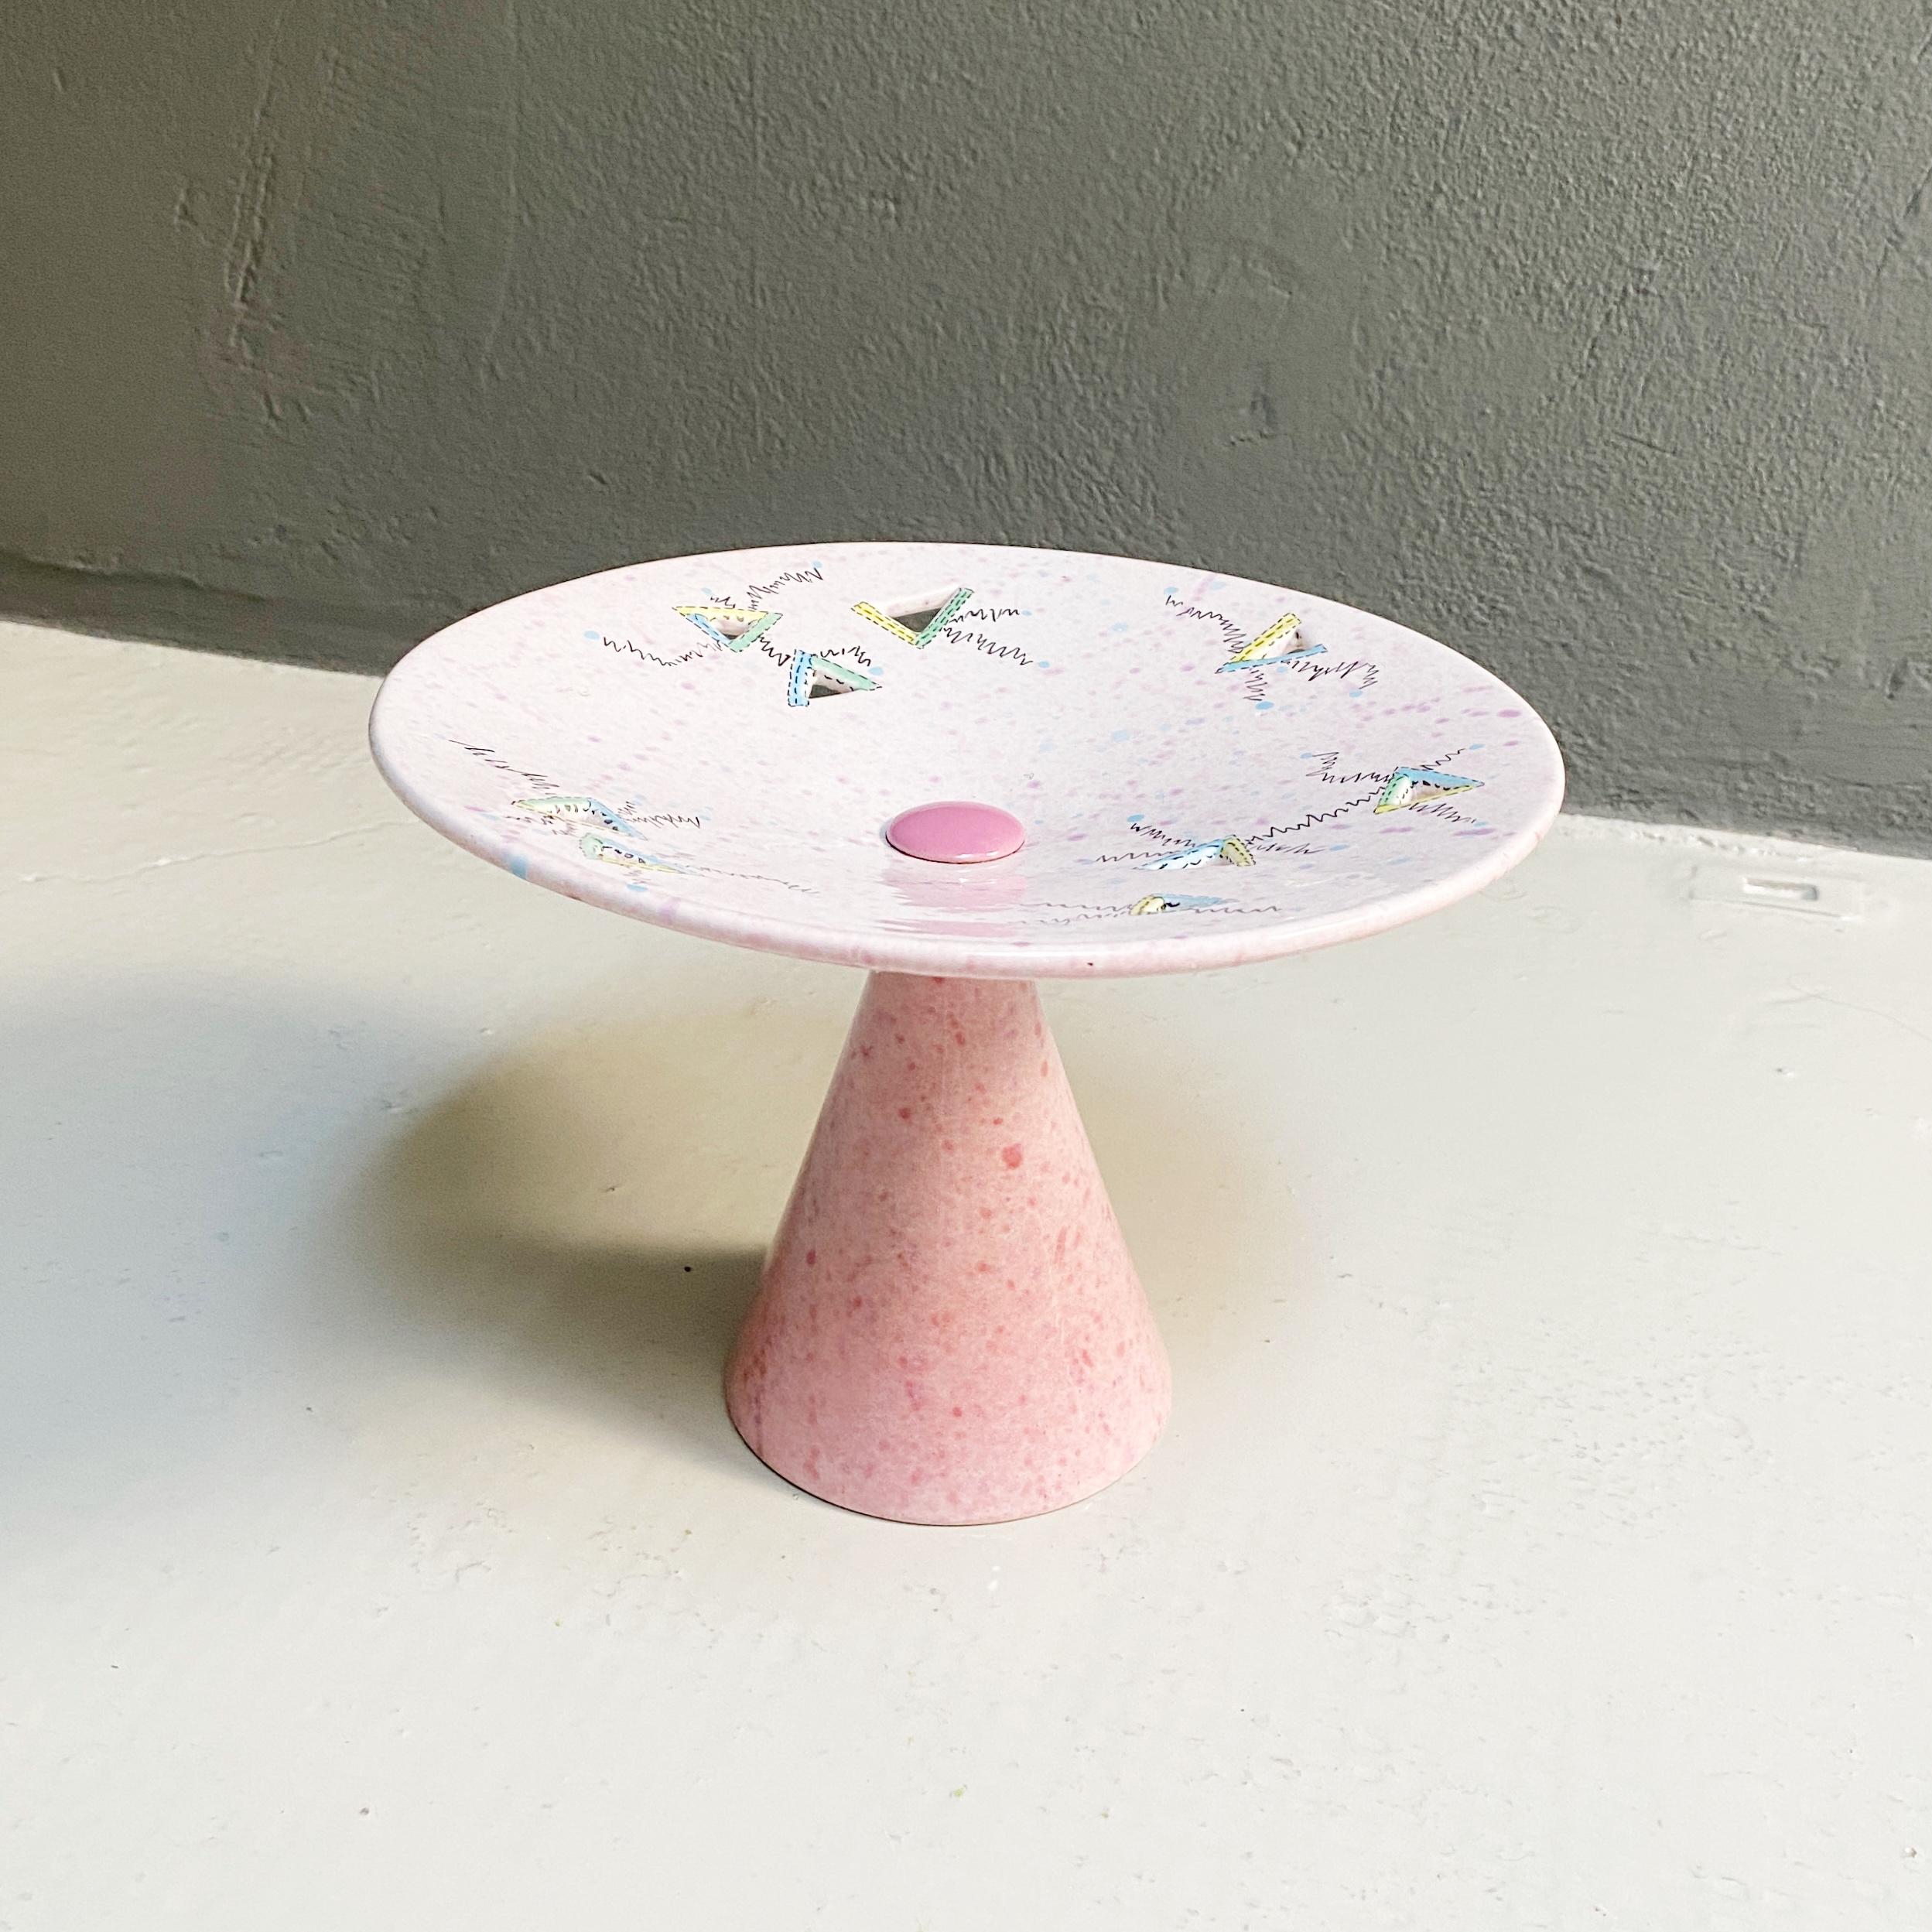 Late 20th Century Modern Pink Ceramic Centerpiece with Motif by Meyer, 1985